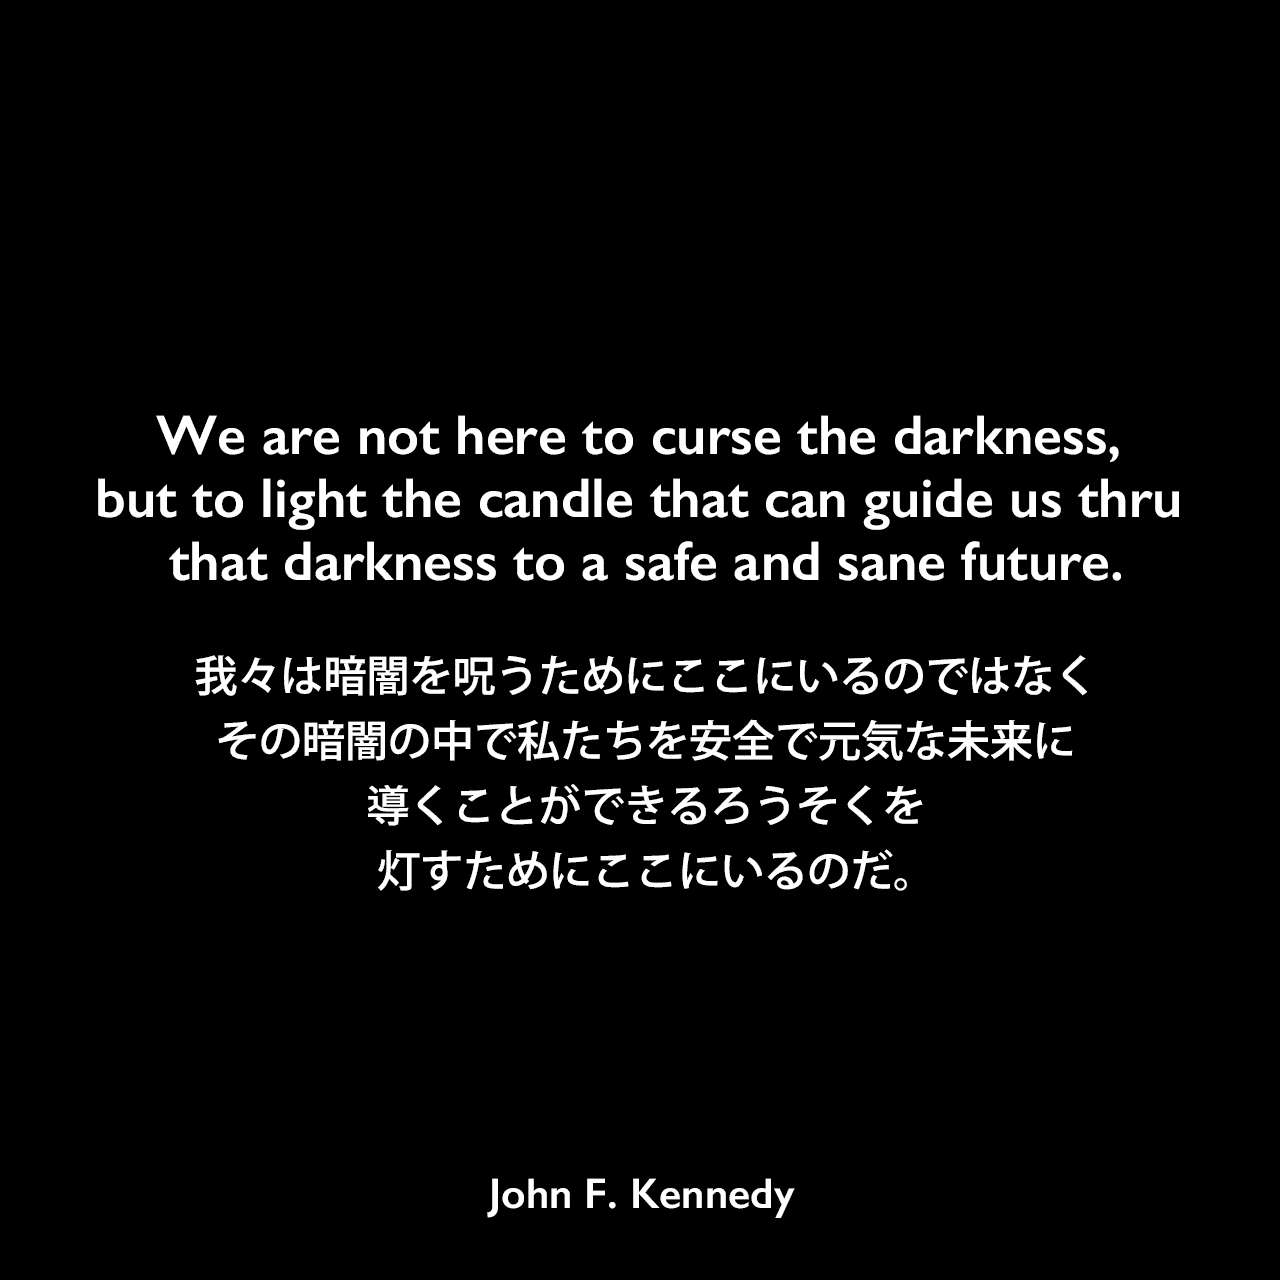 We are not here to curse the darkness, but to light the candle that can guide us thru that darkness to a safe and sane future.我々は暗闇を呪うためにここにいるのではなく、その暗闇の中で私たちを安全で元気な未来に導くことができるろうそくを灯すためにここにいるのだ。- 1960年の民主党大会での「The New Frontier」スピーチよりJohn F Kennedy